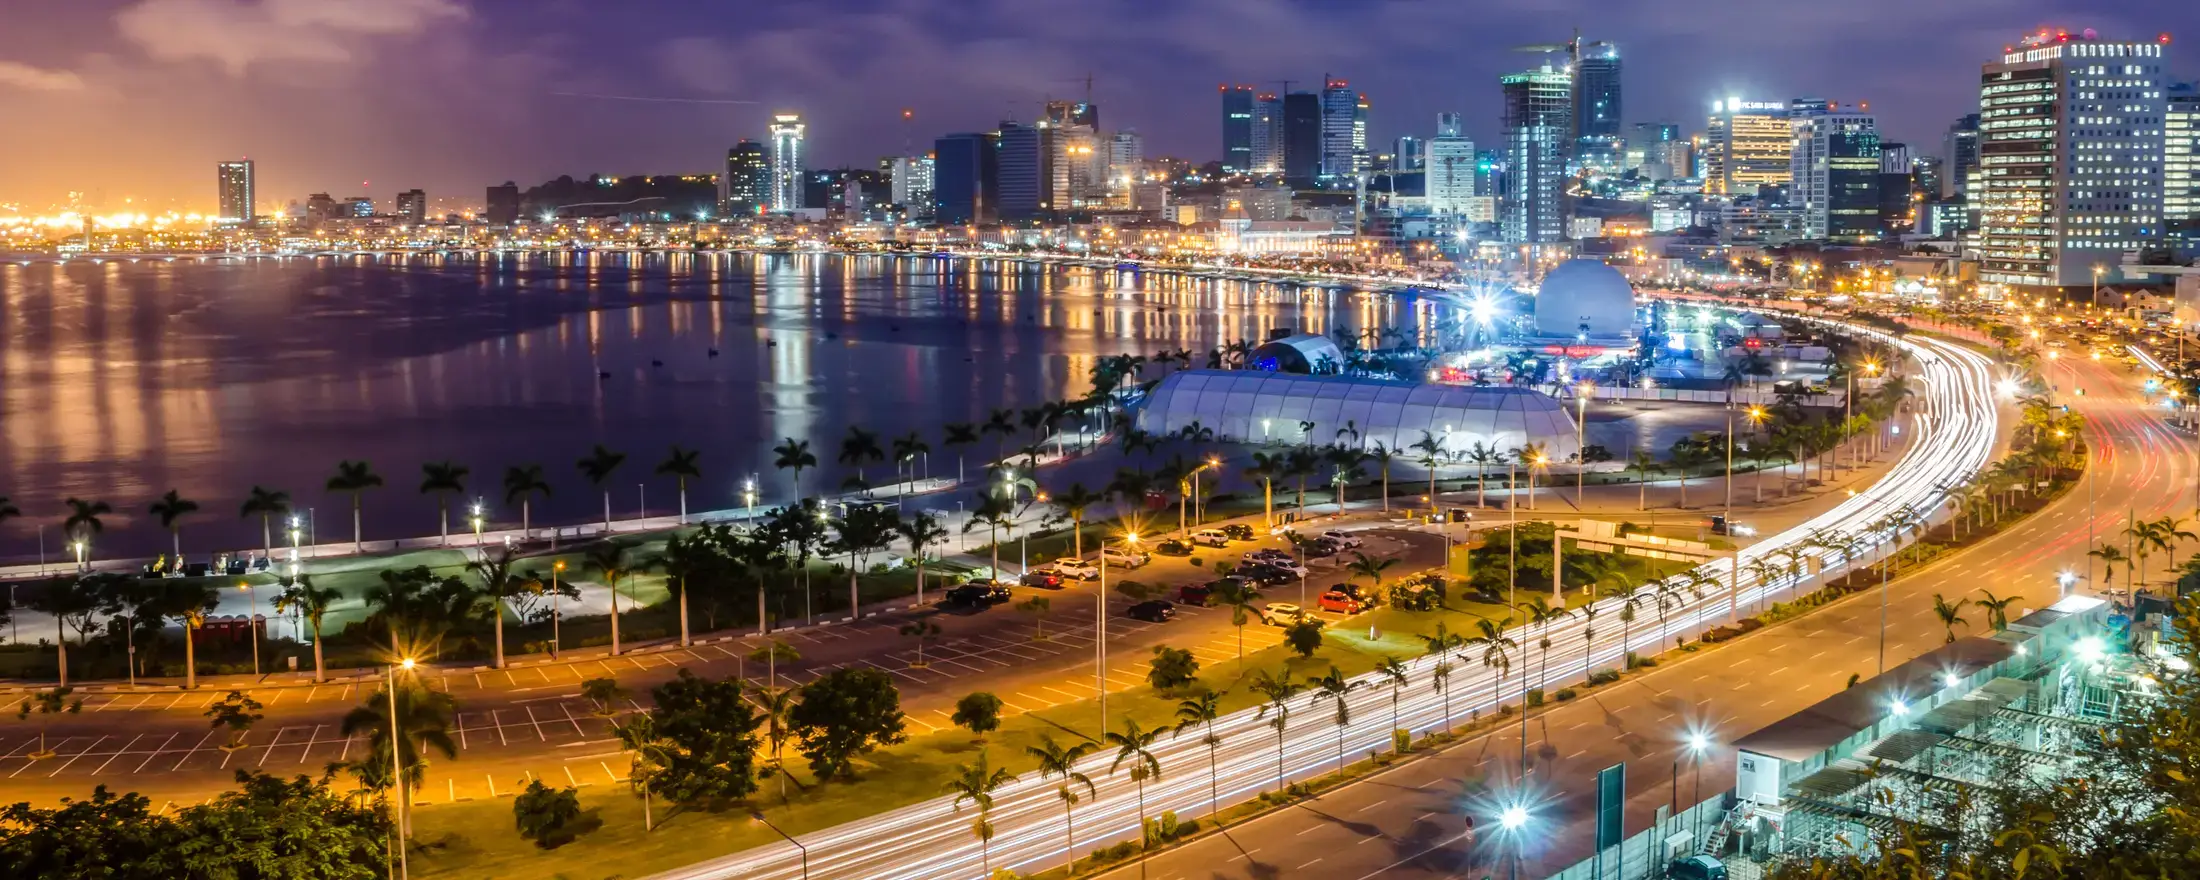 Skyline of capital city, Luanda, Luanda bay and seaside promenade with highway during afternoon, Angola, Africa